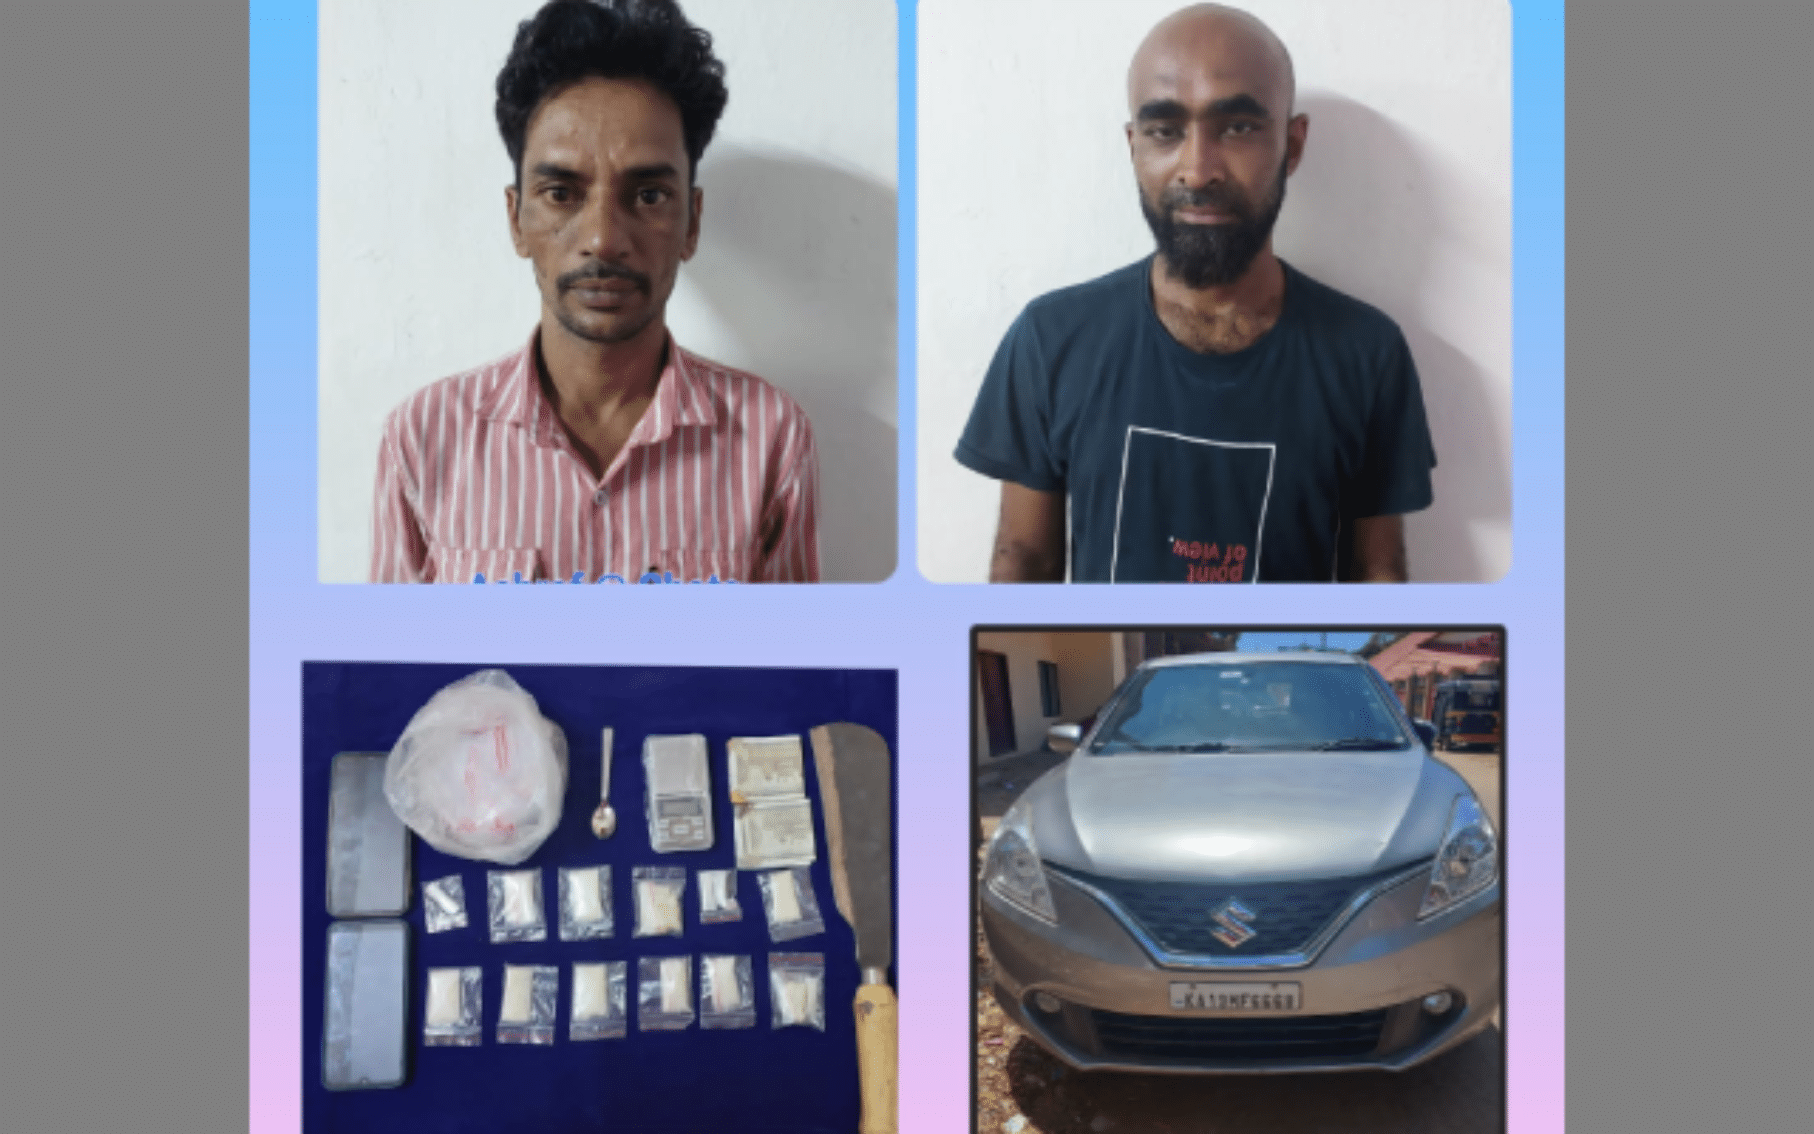 Two arrested for selling drugs, property worth Rs 13 lakh seized